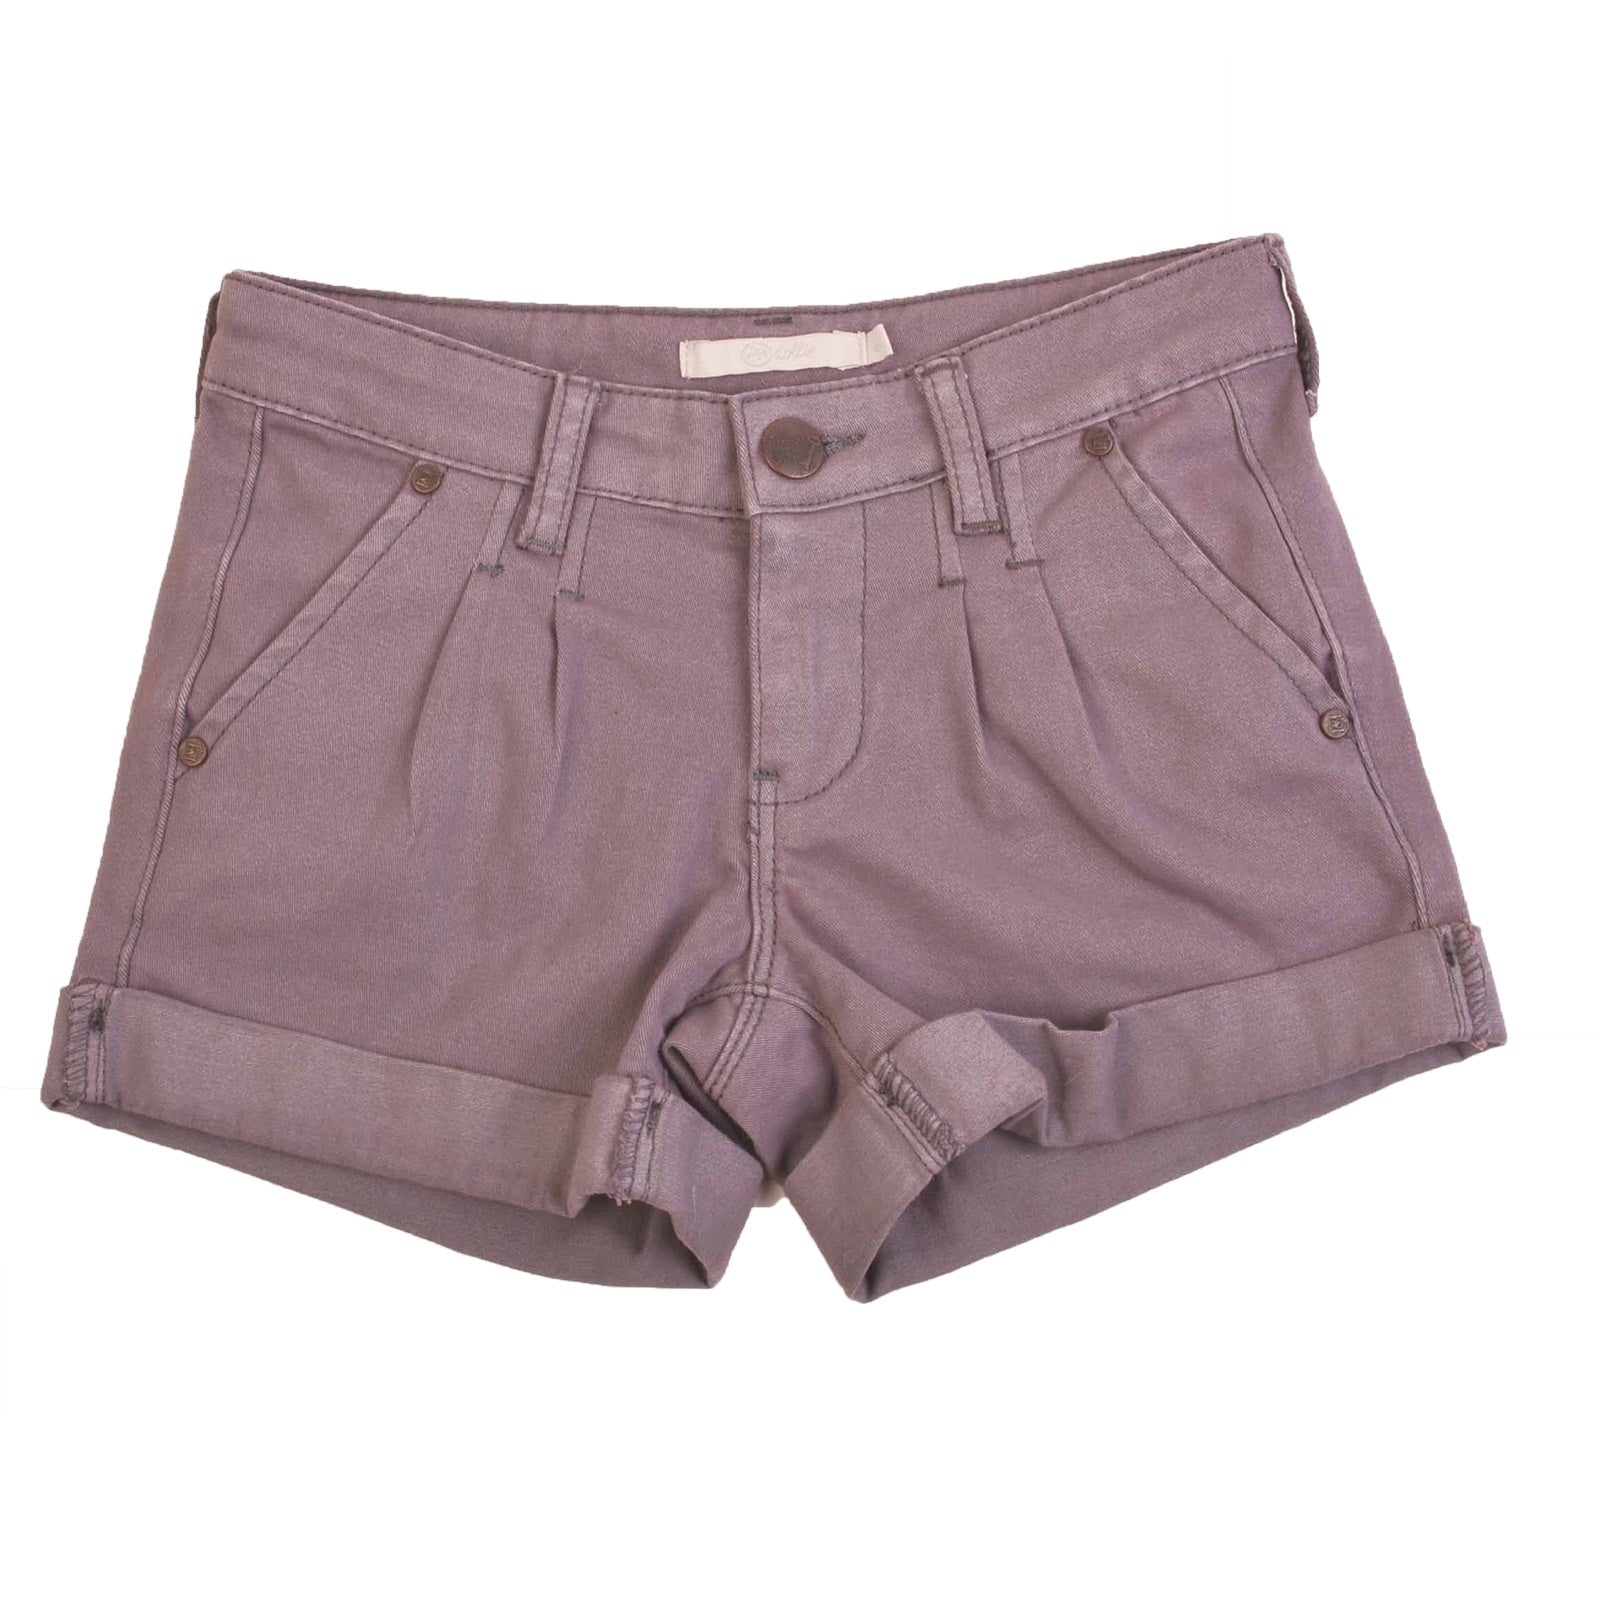 
  Shorts from the Silvian Heach girl's clothing line in soft fabric
  with pockets on the front ...